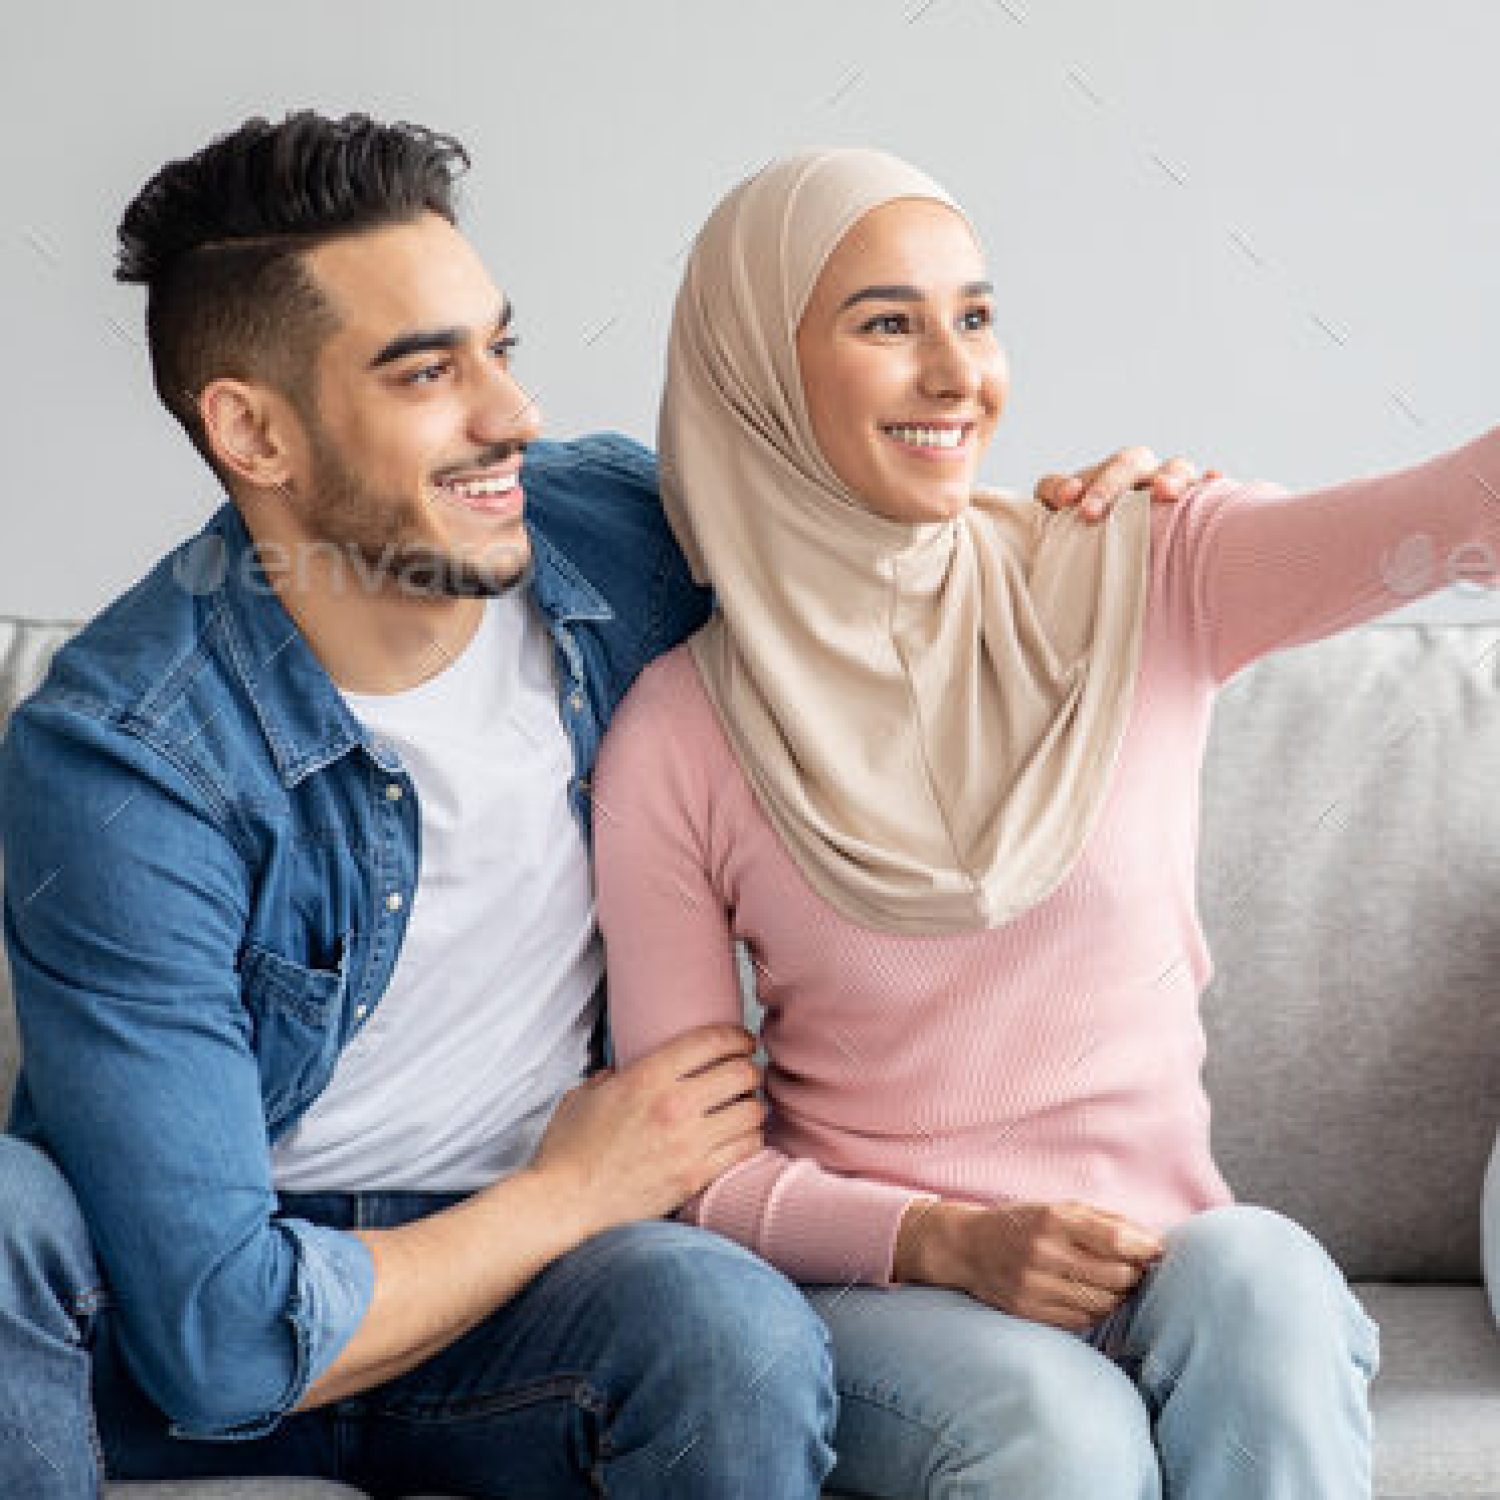 Handsome middle-eastern man and woman in hijab smiling at smartphone camera, copy space. Beautiful arab couple embracing and taking selfie on mobile phone for social media while resting at home